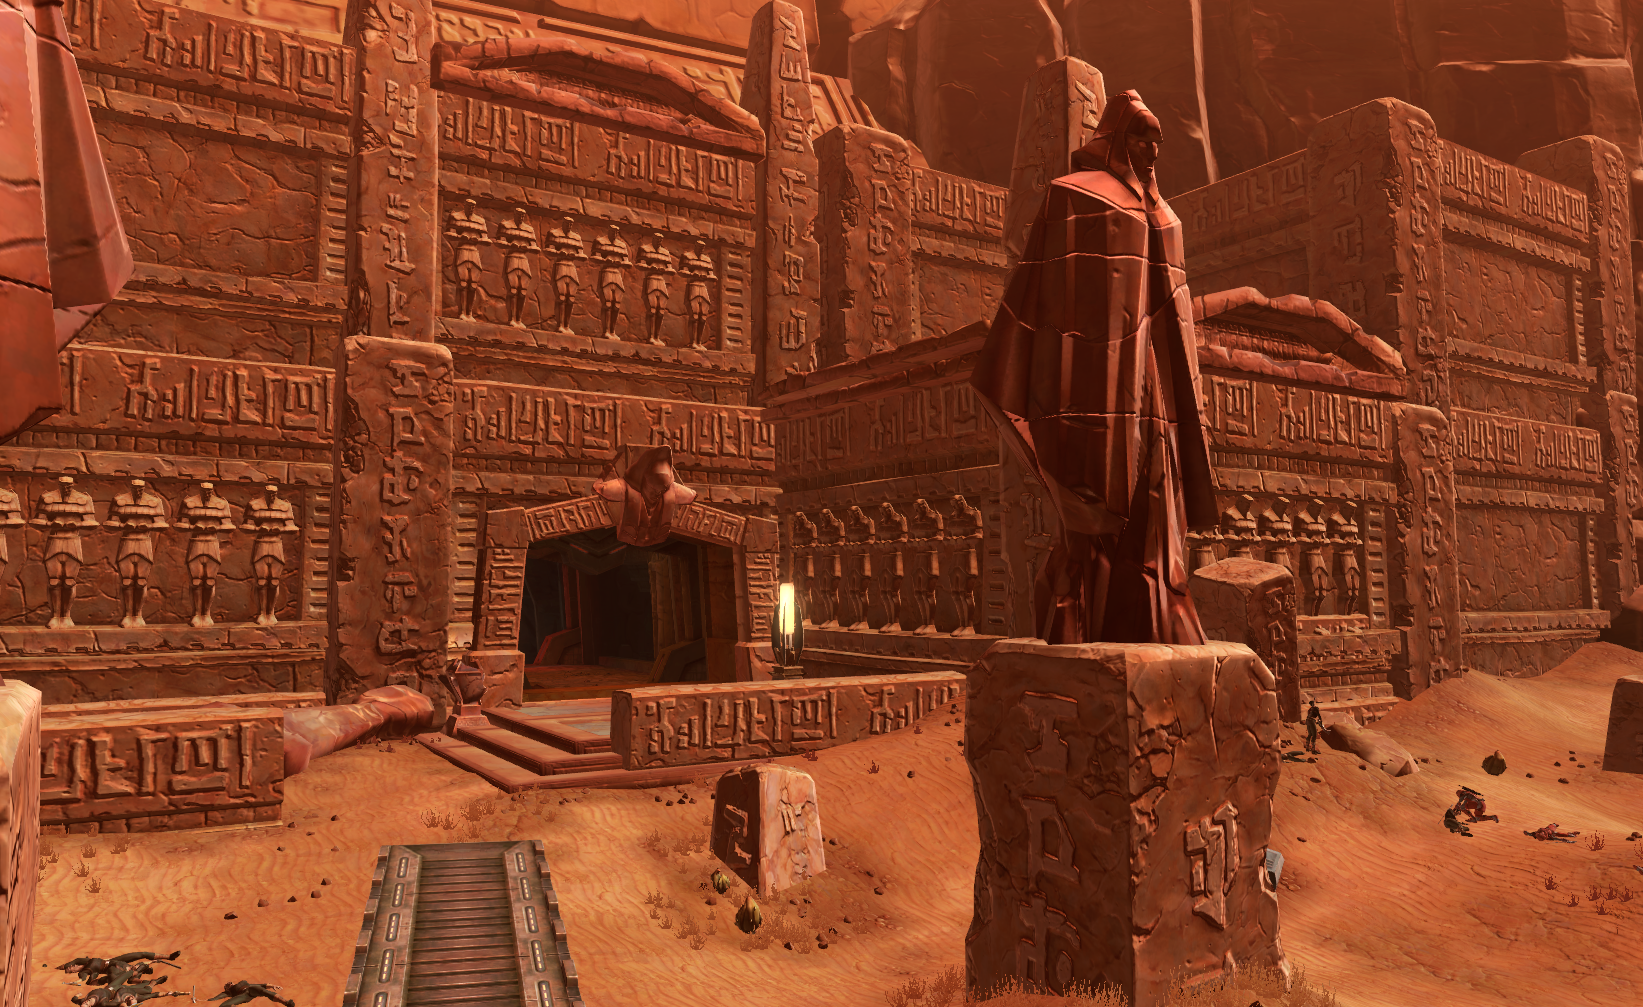 kotor 2 sith tomb puzzle